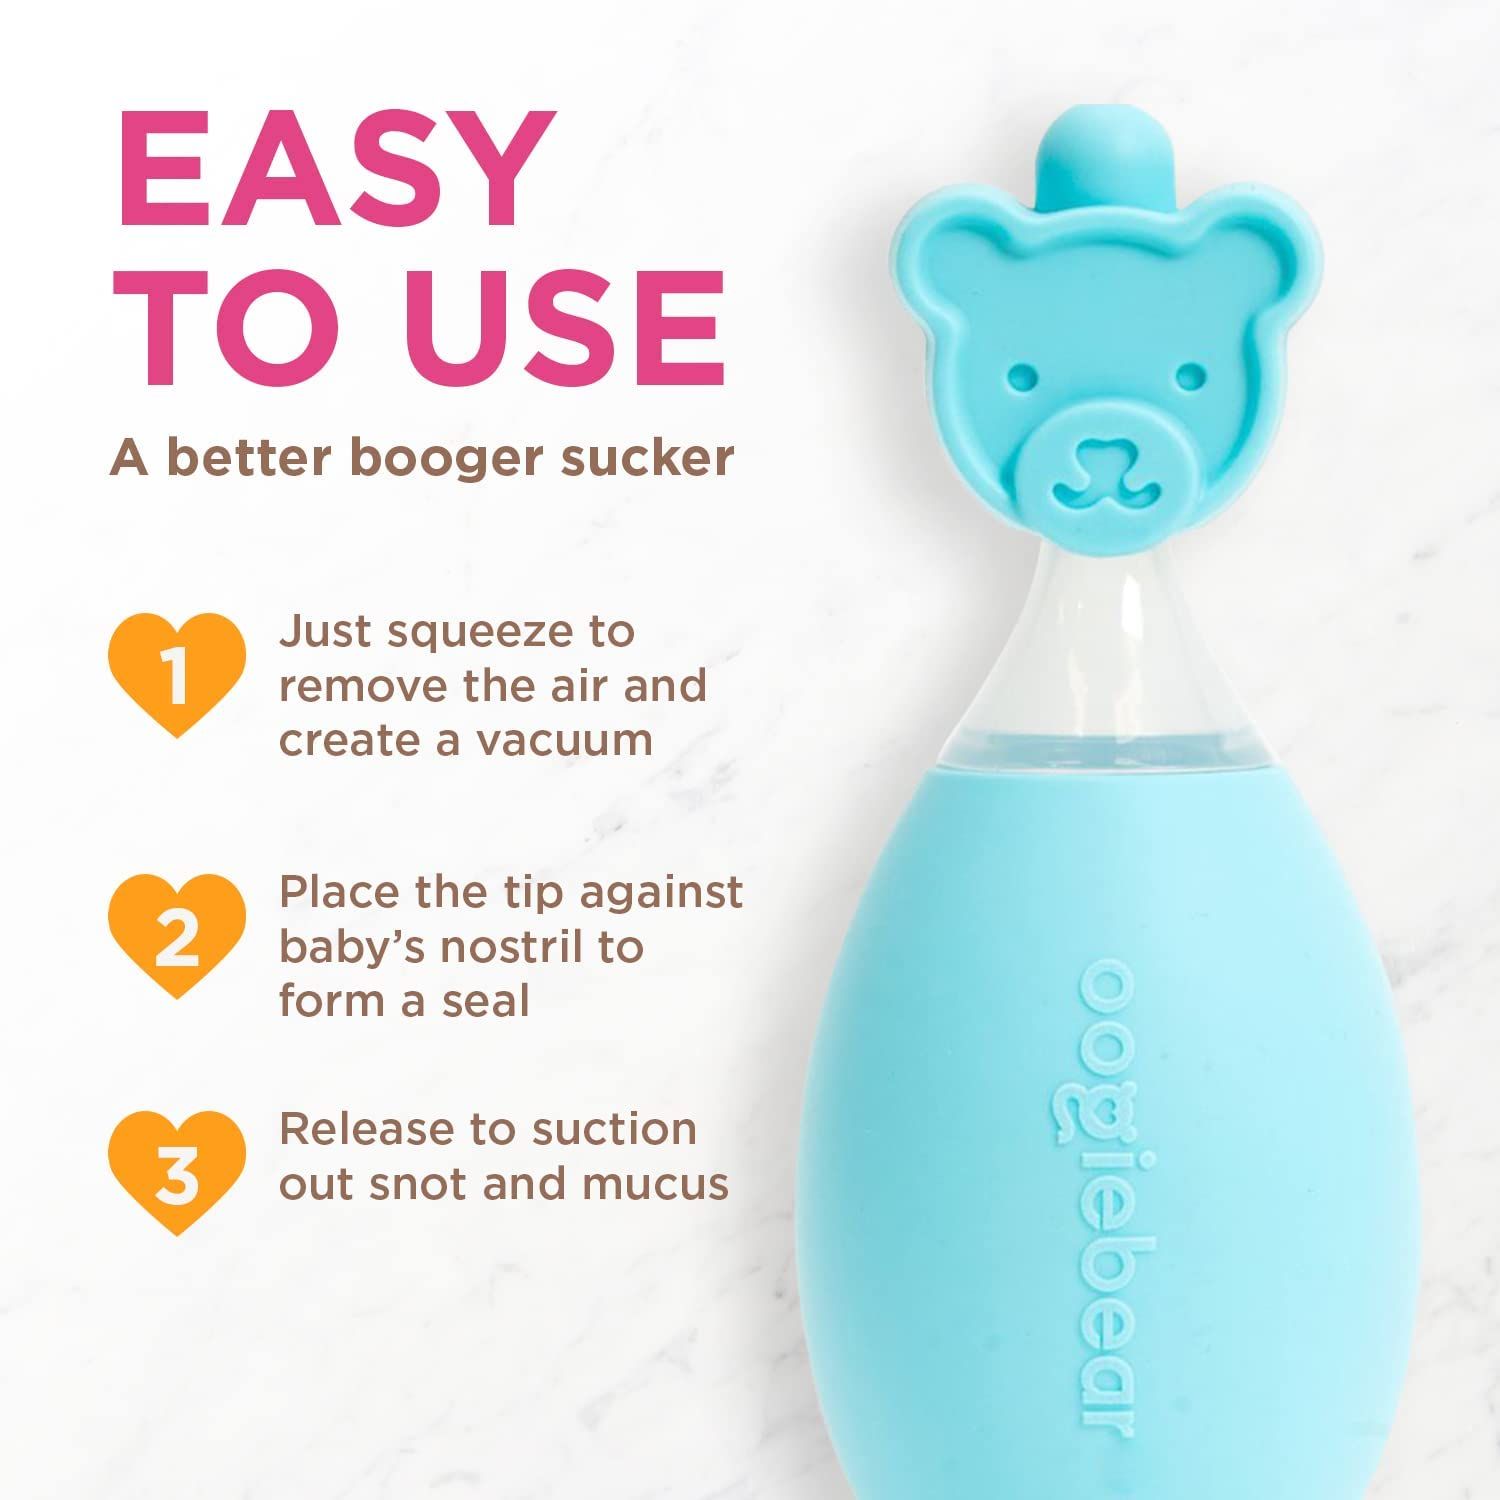 oogiebear Bear Pair — The Safe Baby Booger Cleaner and Nose Sucker Duo | Bulb Aspirator and 2-i... | Amazon (US)